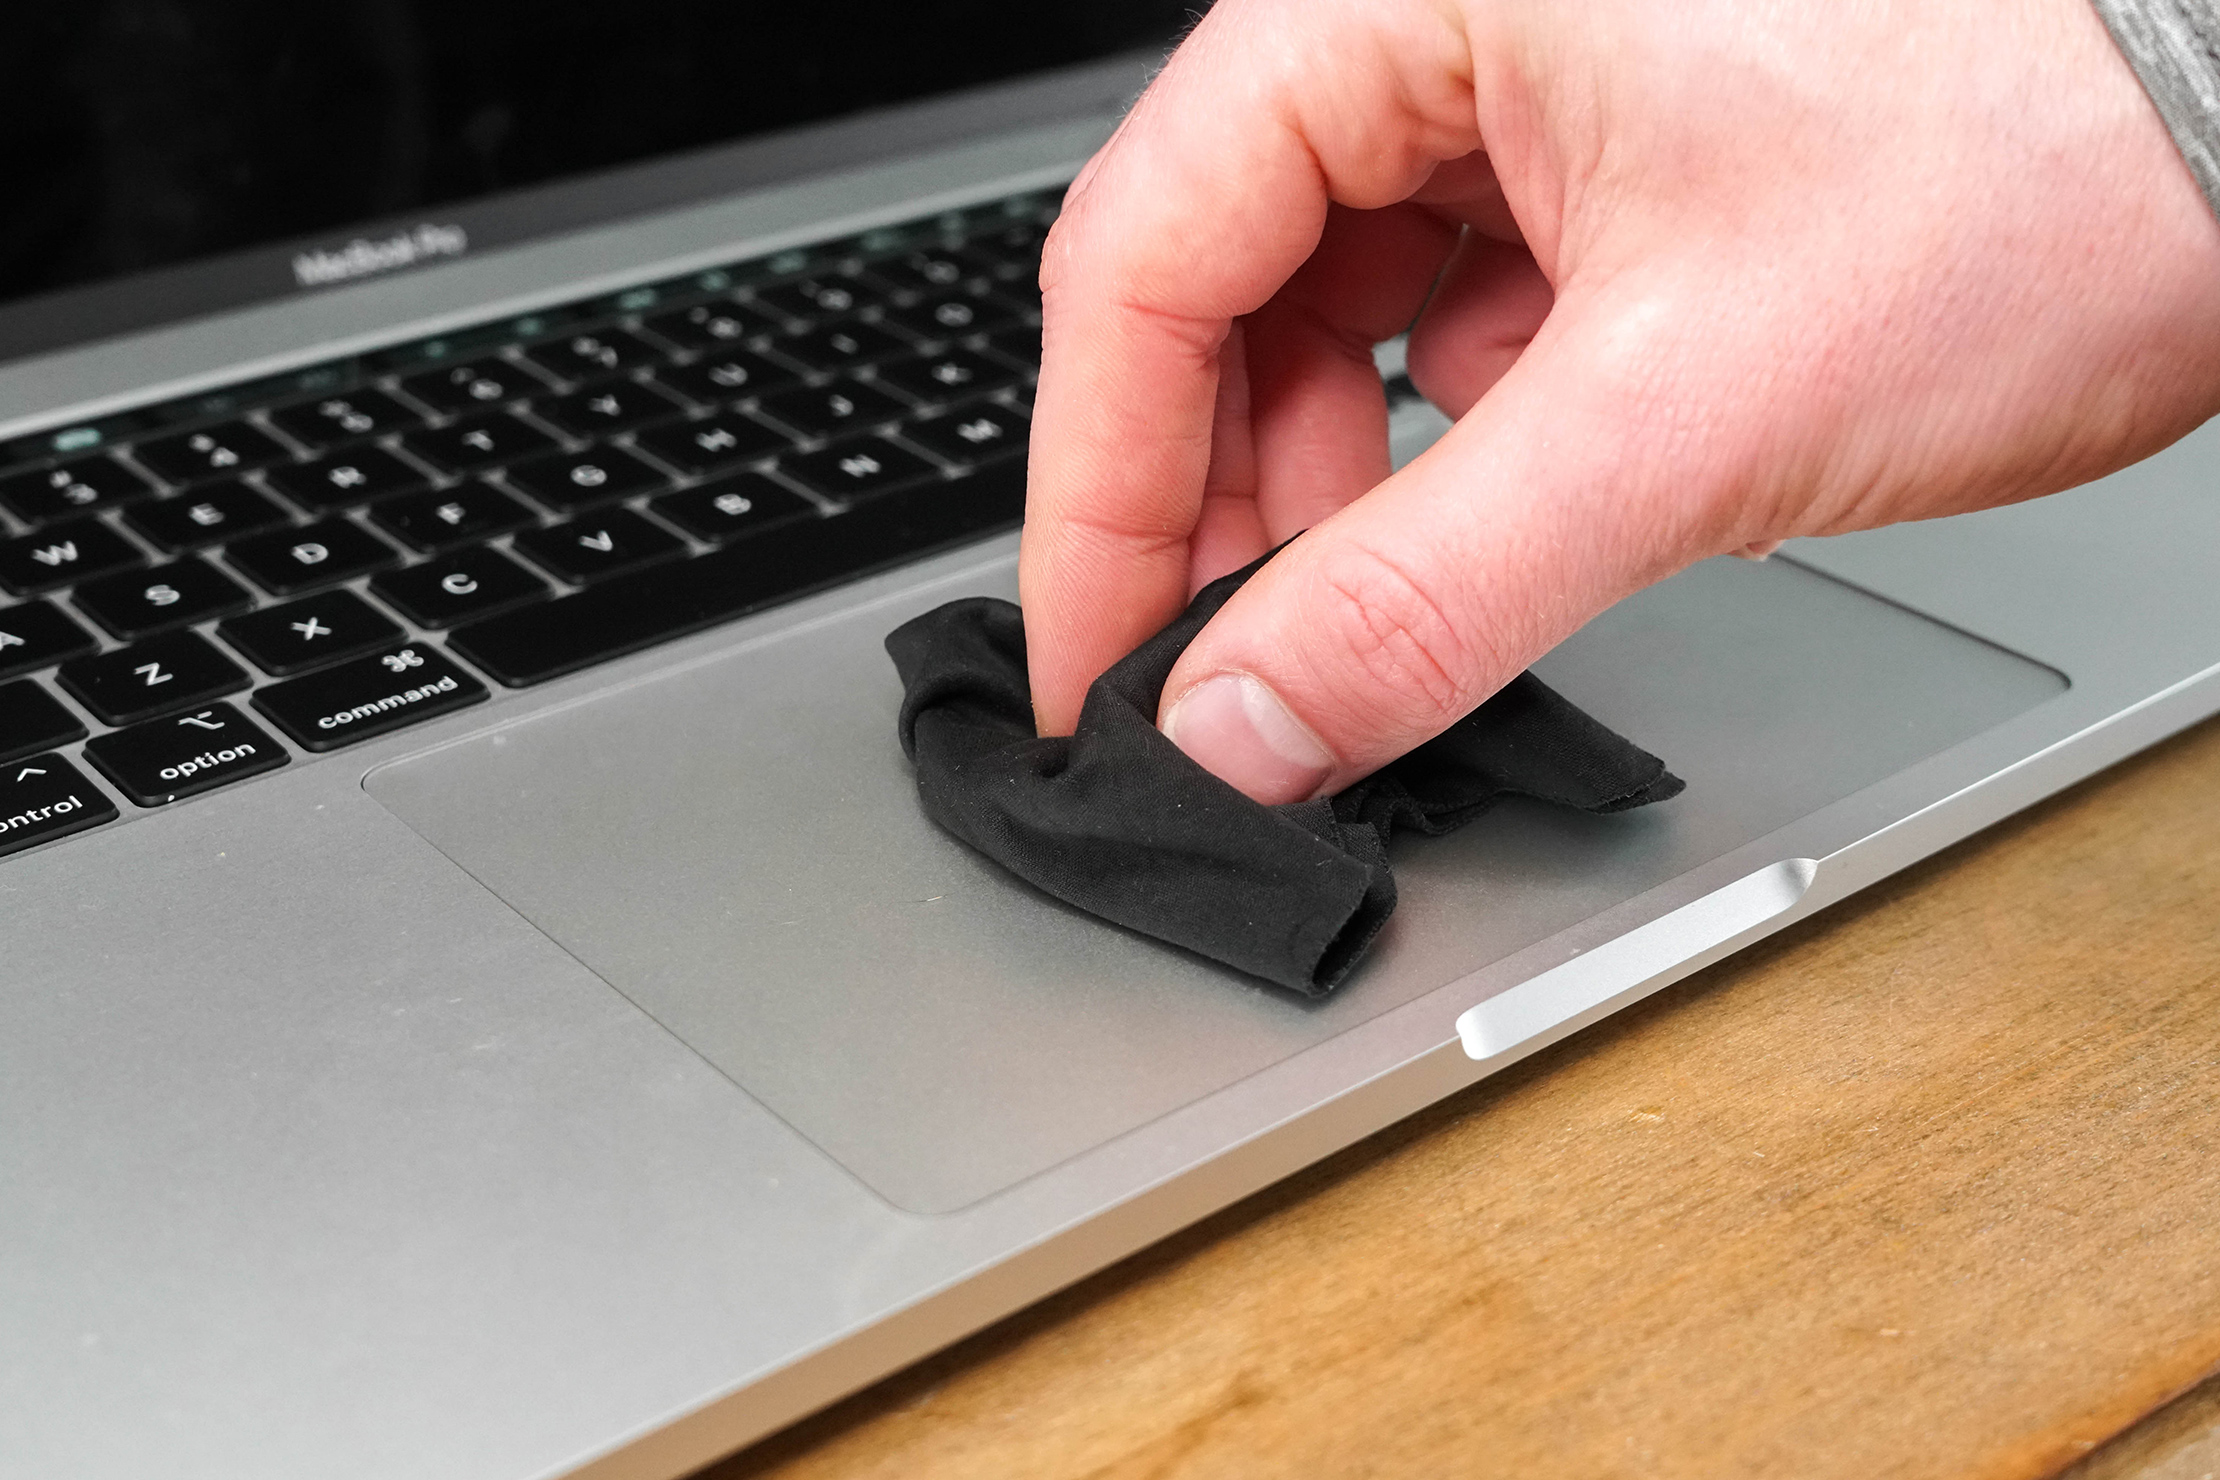 Wiping Trackpad with Cloth